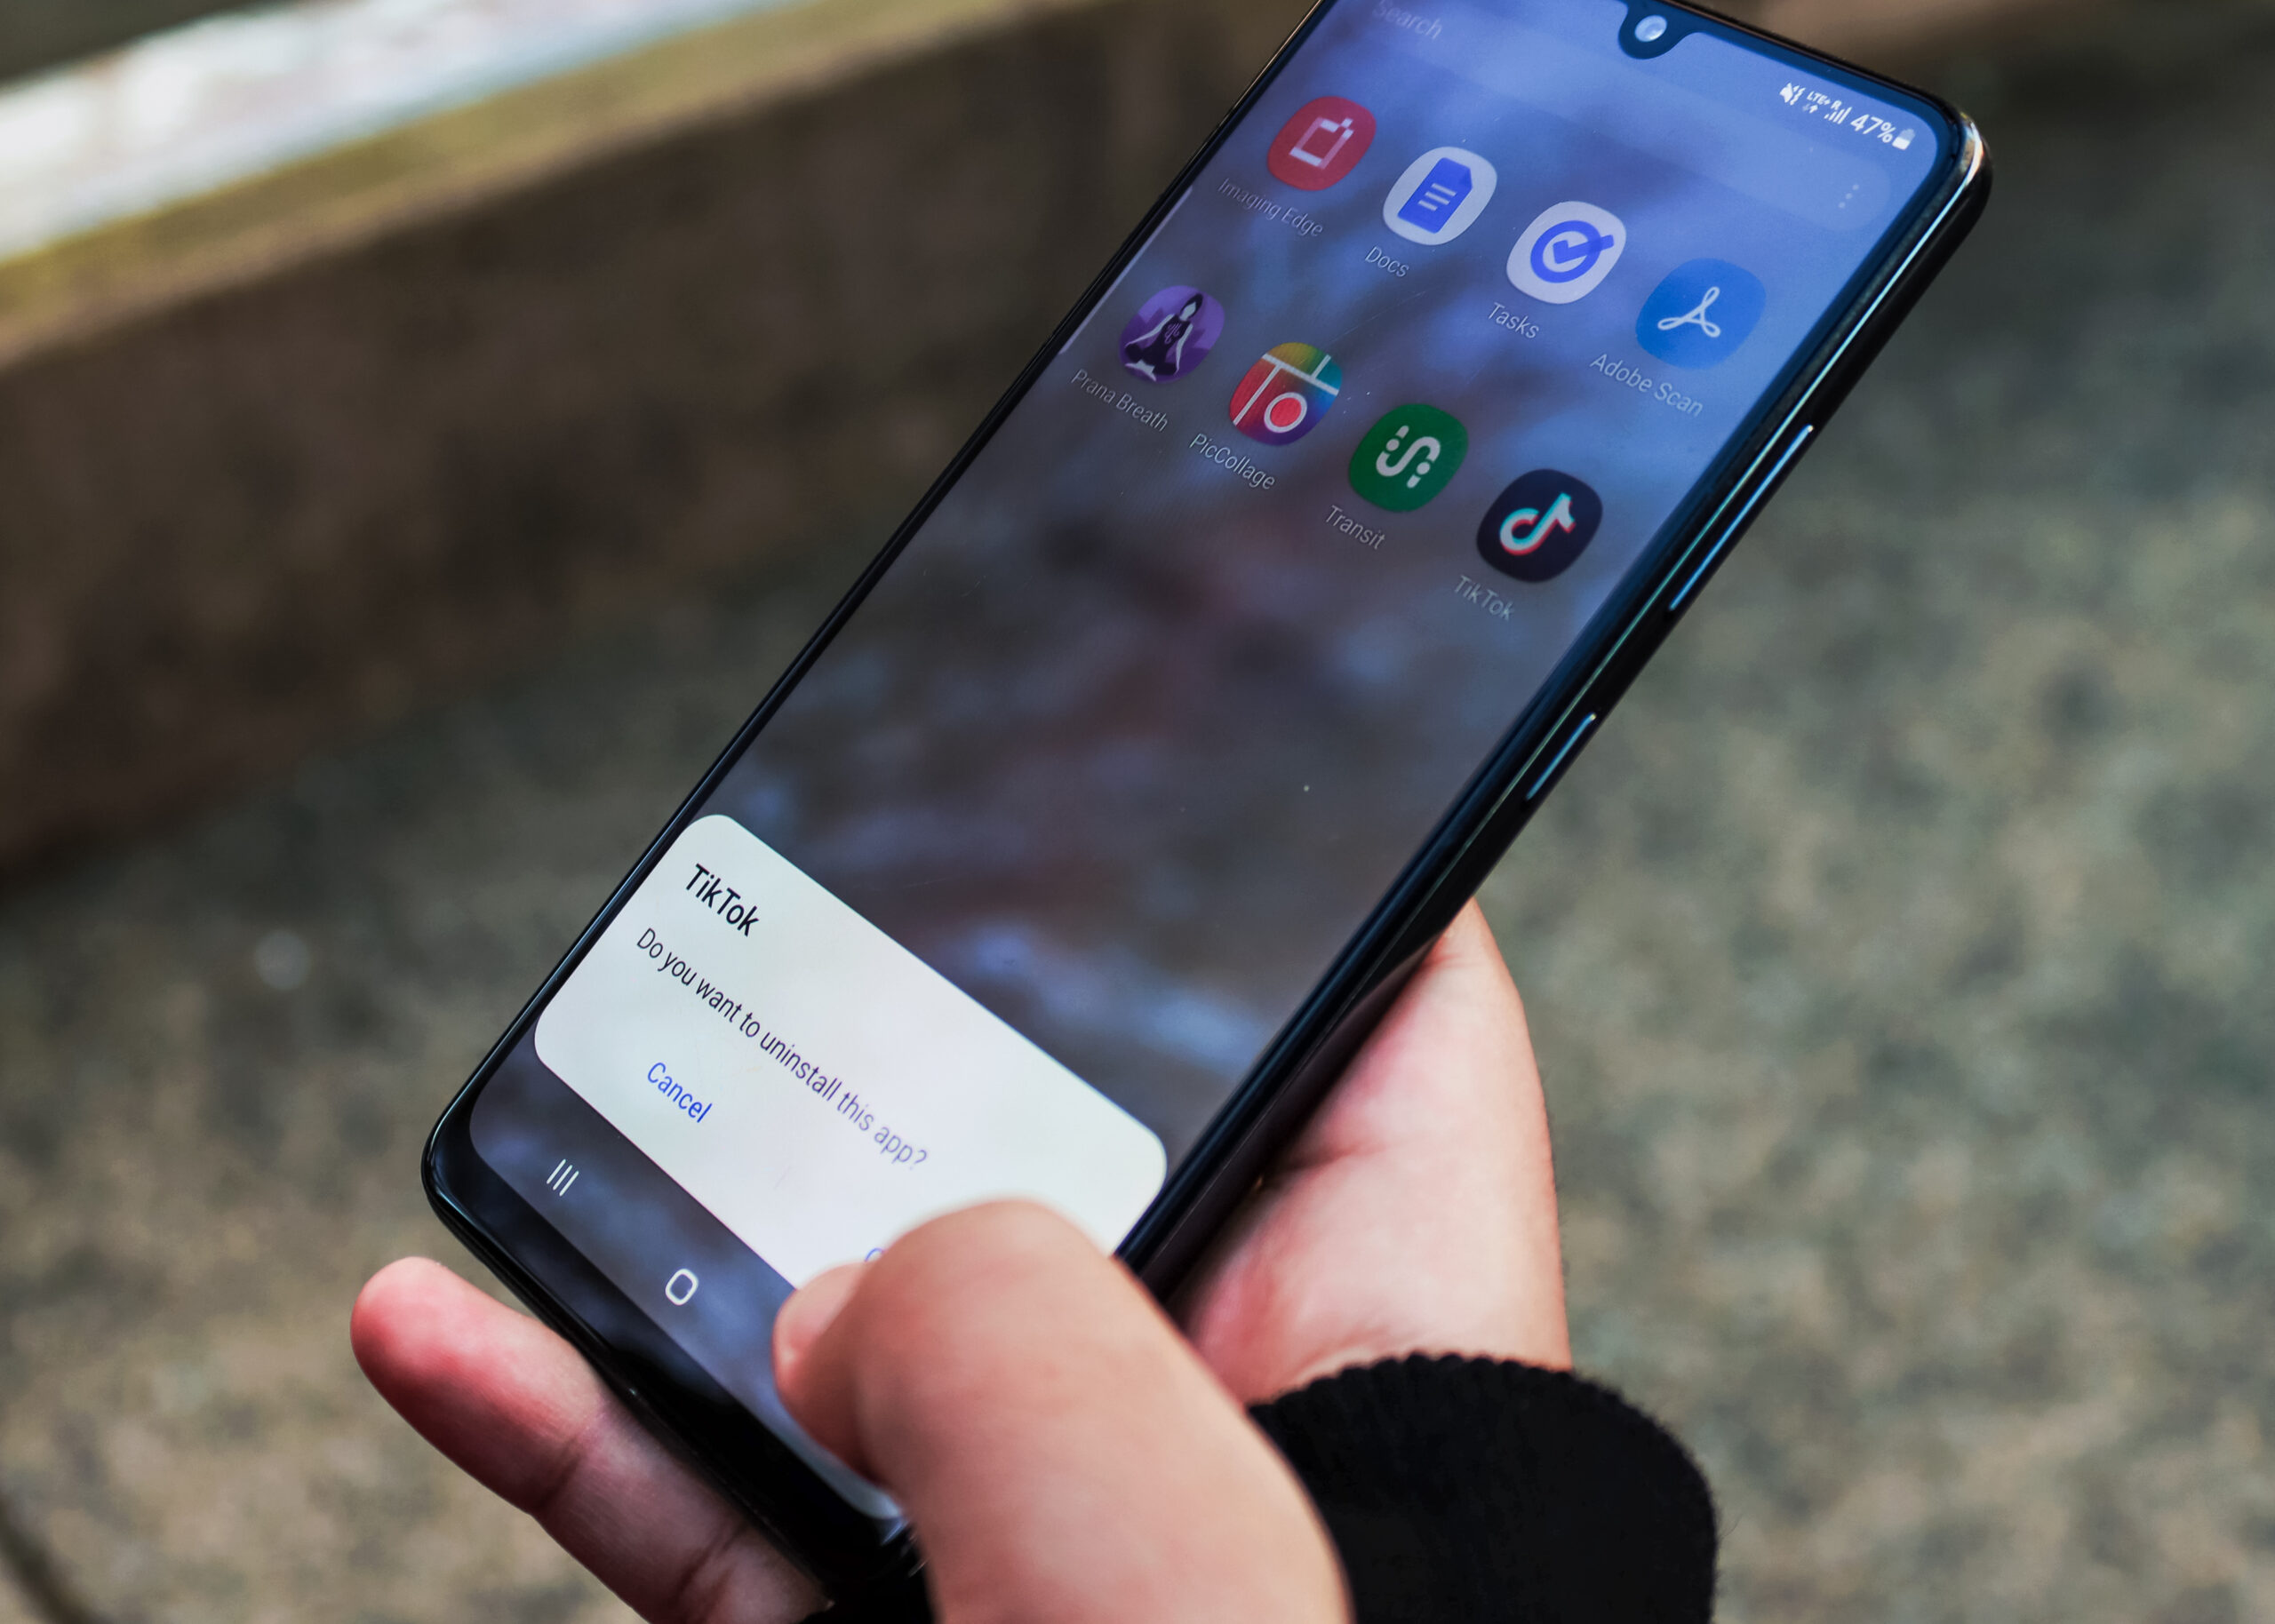 A photo shows someone holding a mobile phone. On the screen, a TikTok notification bar is asking: “Do you want to uninstall this app?” The person’s thumb hovers over they “Okay” button.